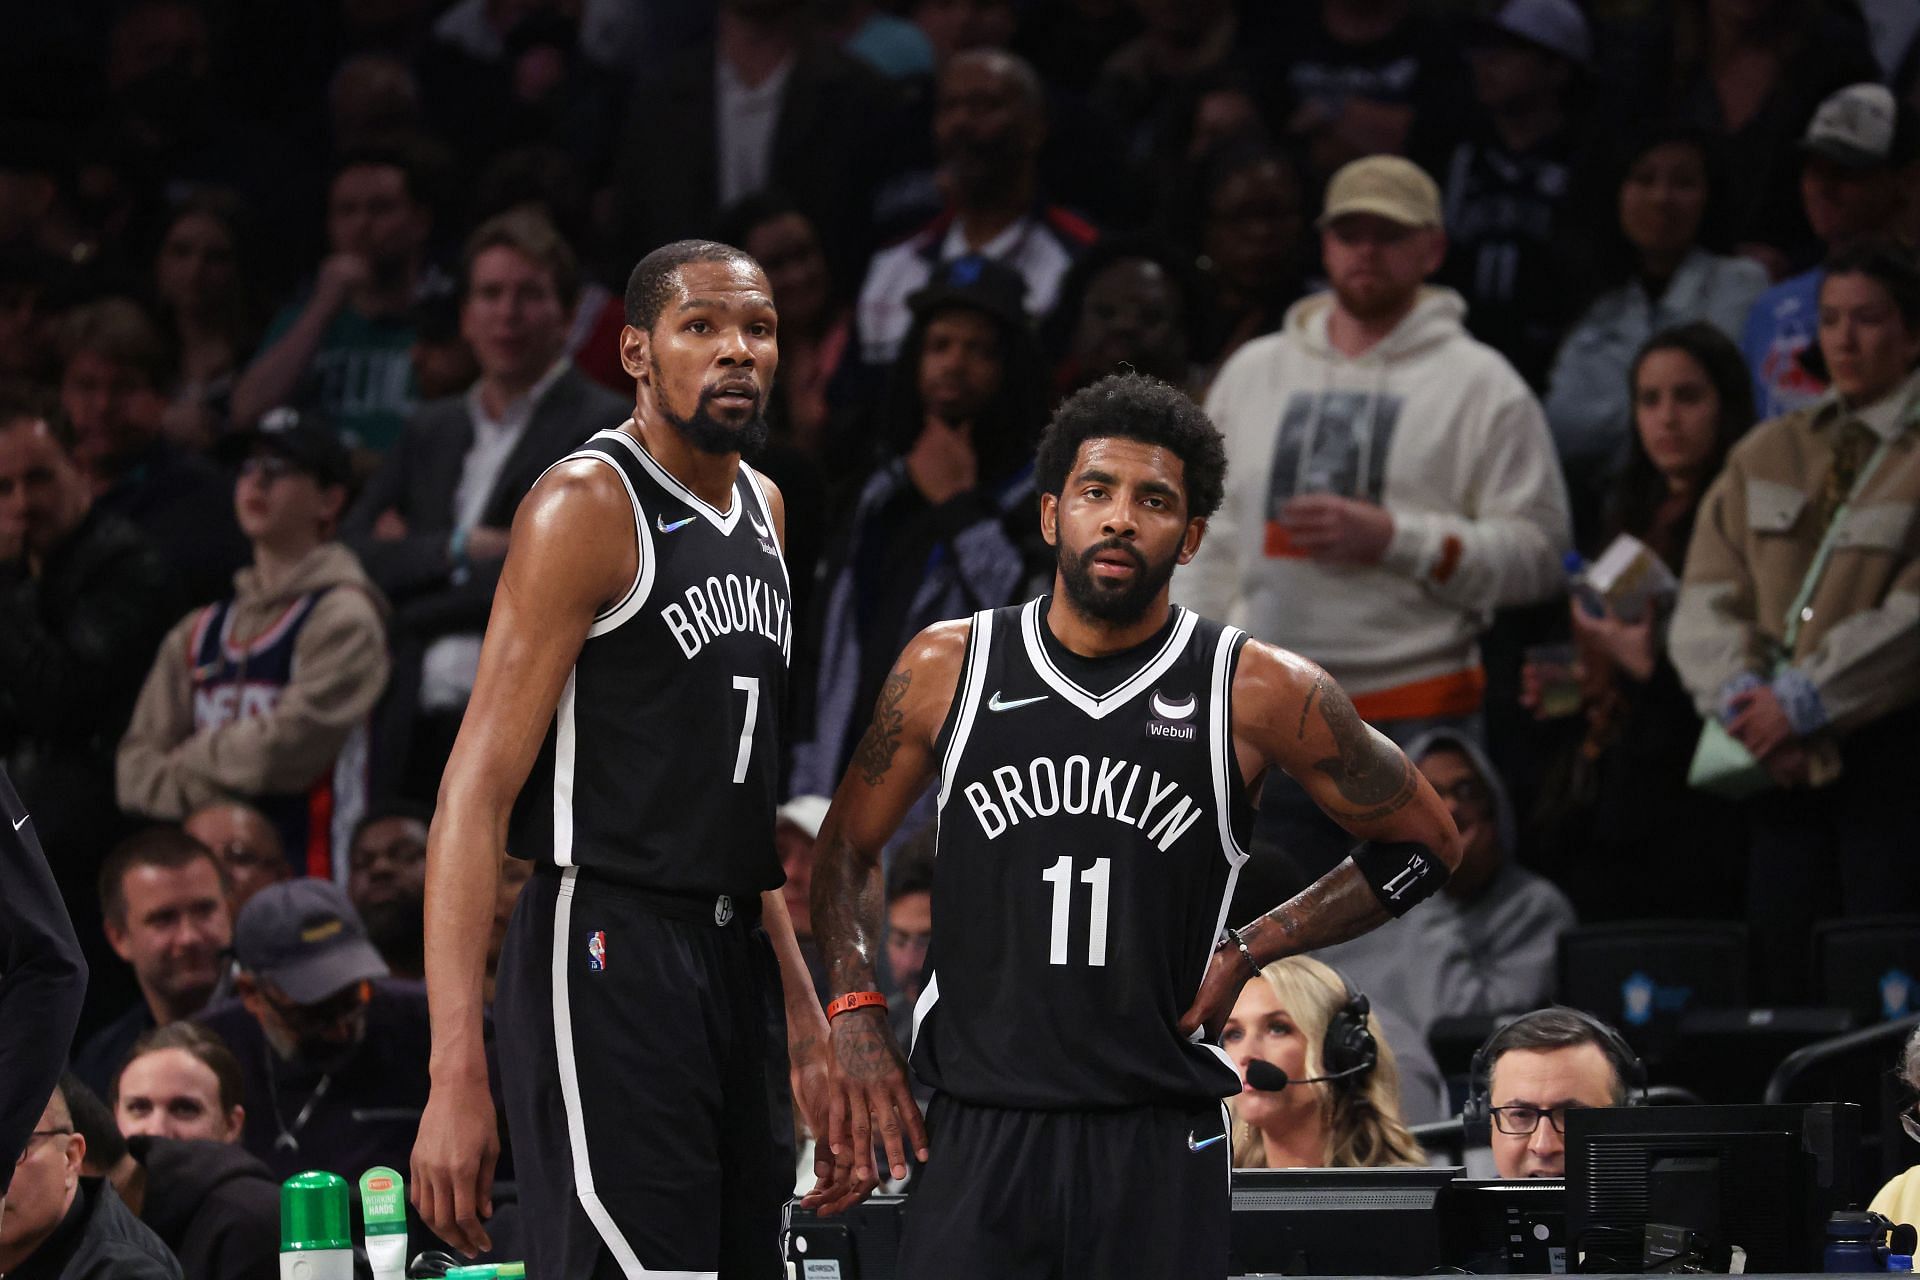 The Brooklyn Nets may offer Irving a contract extension soon. [Image Credit: Getty Images]